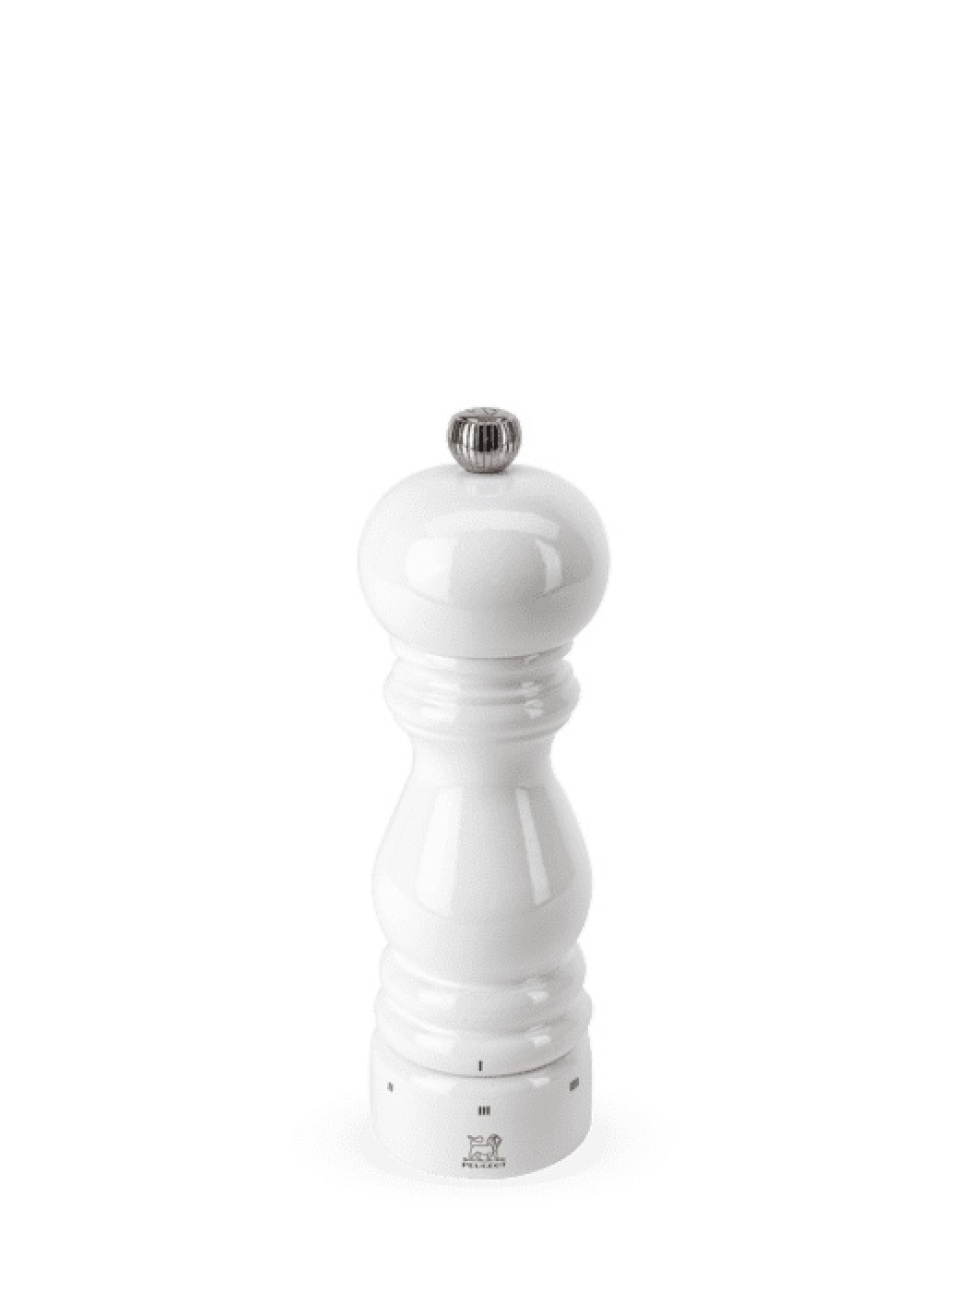 Paris Pepper mill 18 cm, U Select, White - Peugeot in the group Cooking / Kitchen utensils / Salt & pepper mills at KitchenLab (1090-13451)